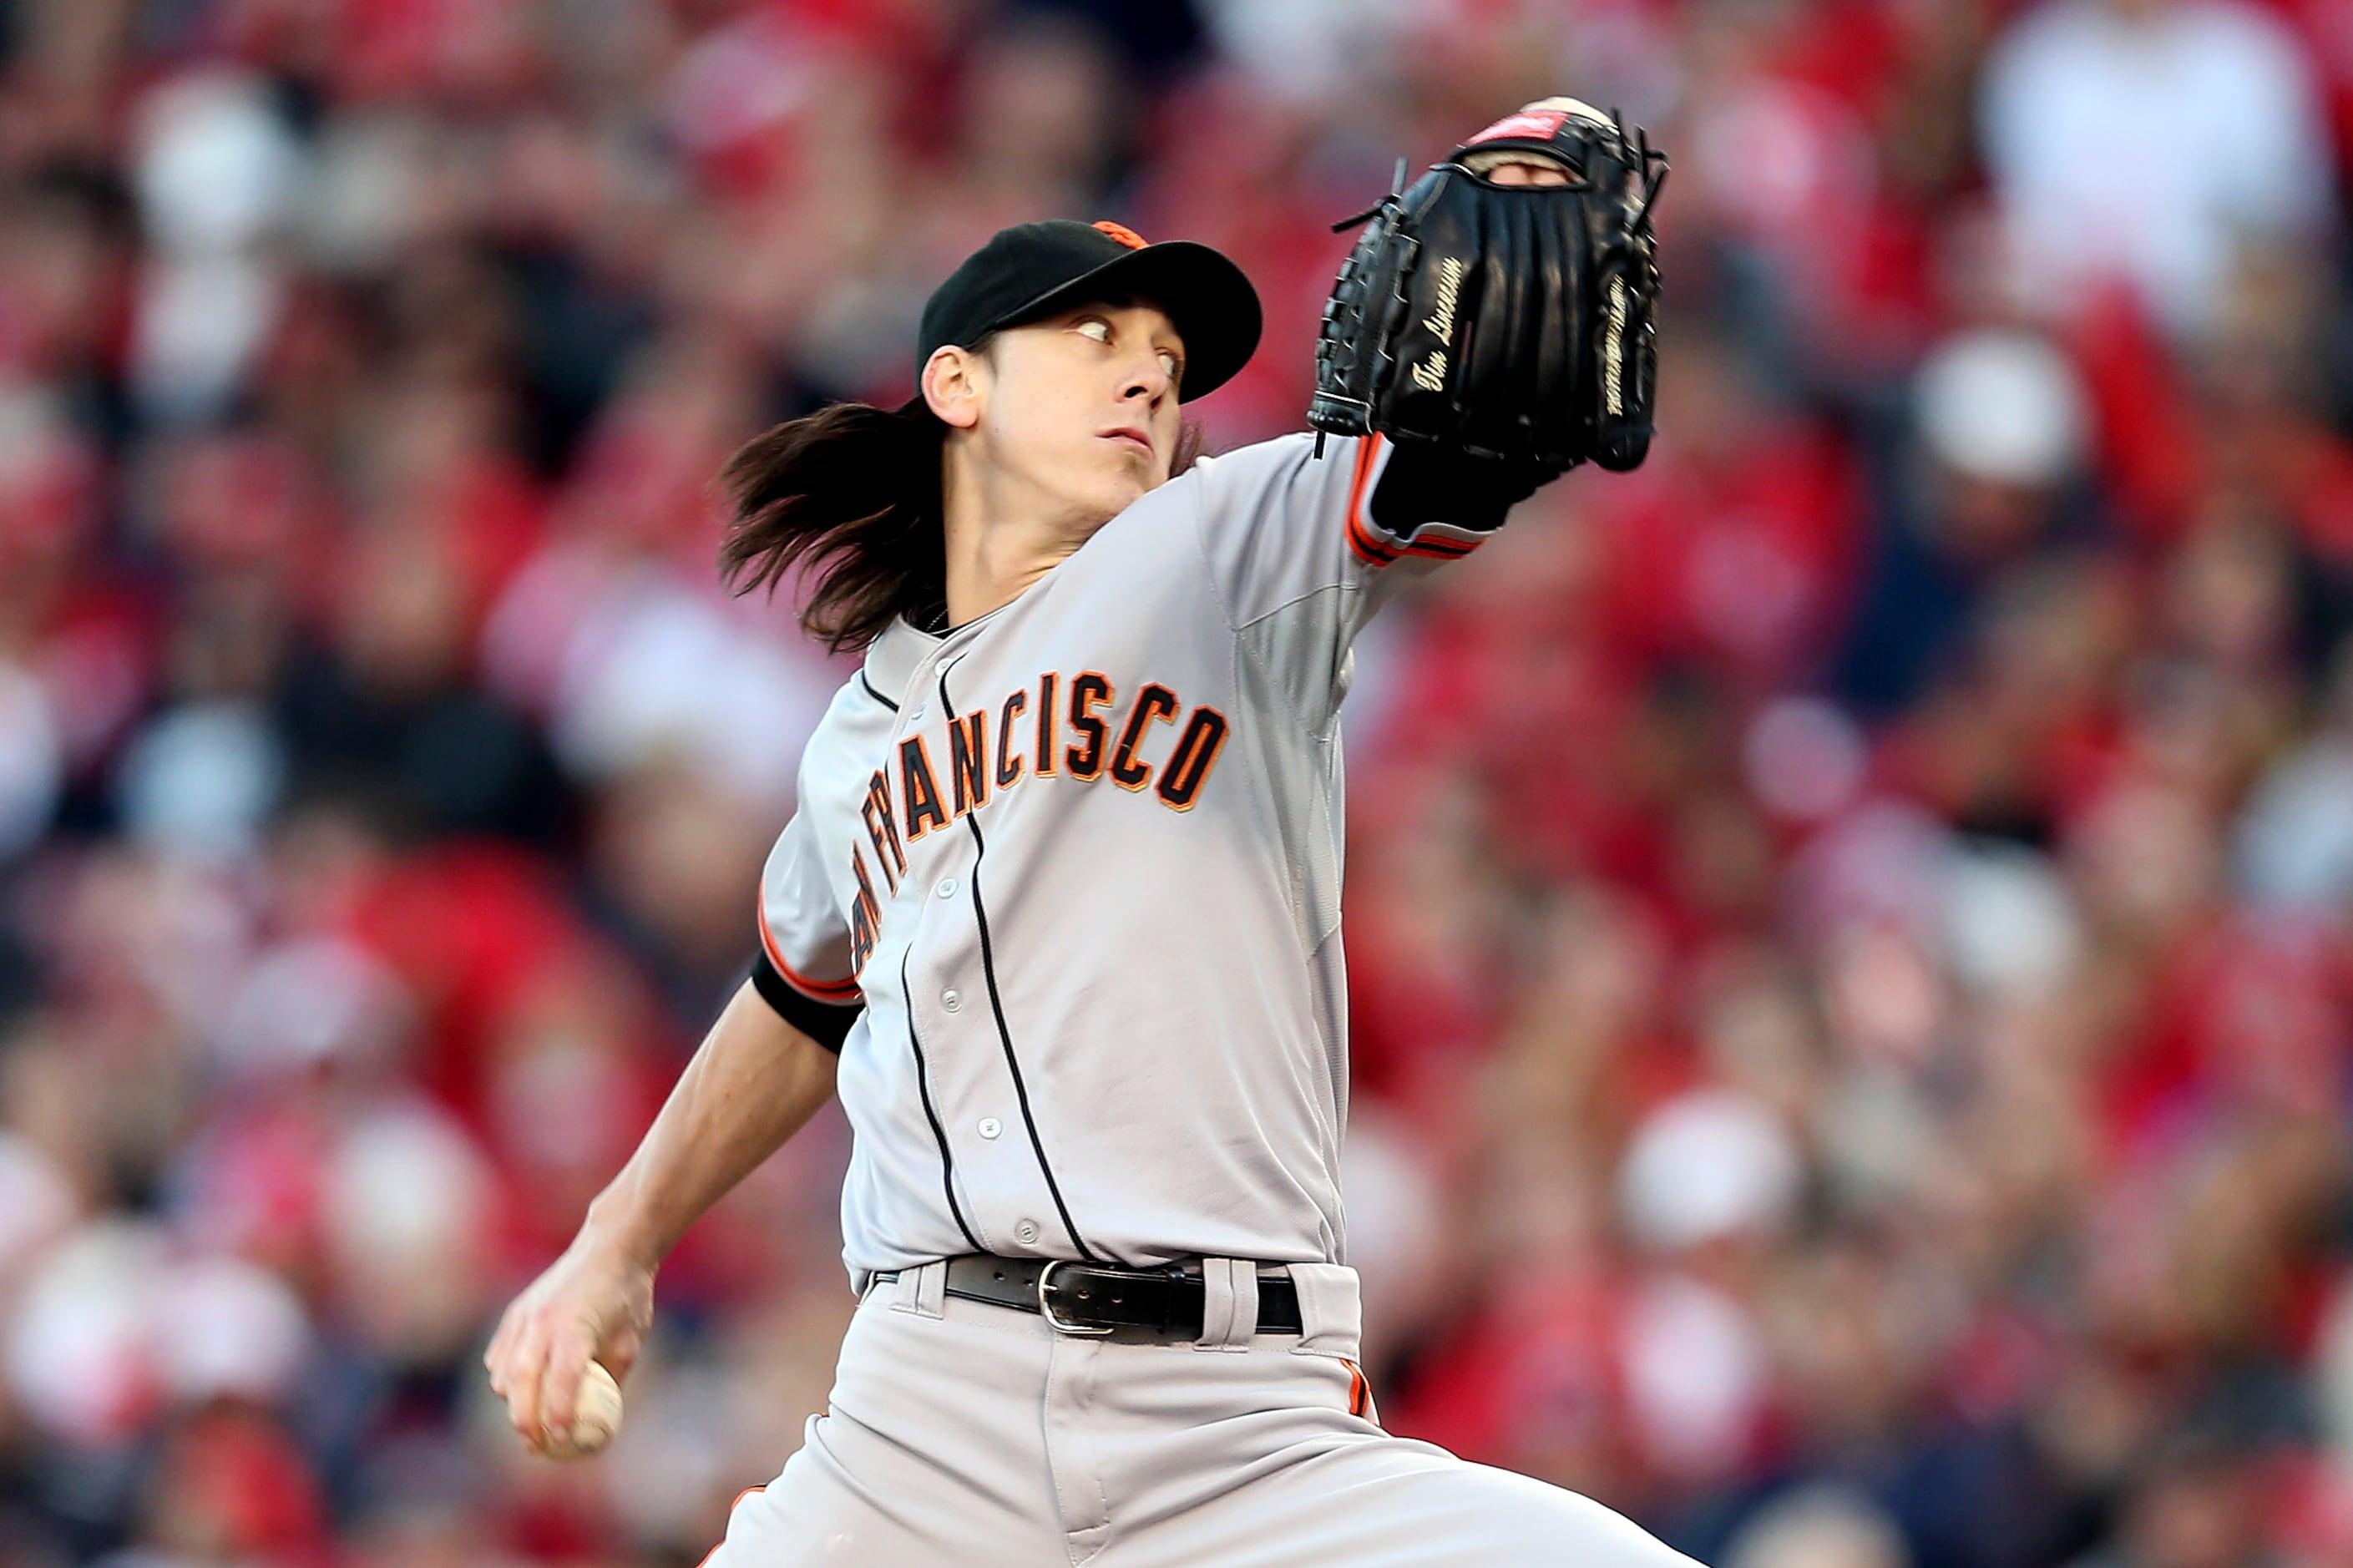 Giants' Tim Lincecum emerges out of bullpen to push Reds to deciding Game 5